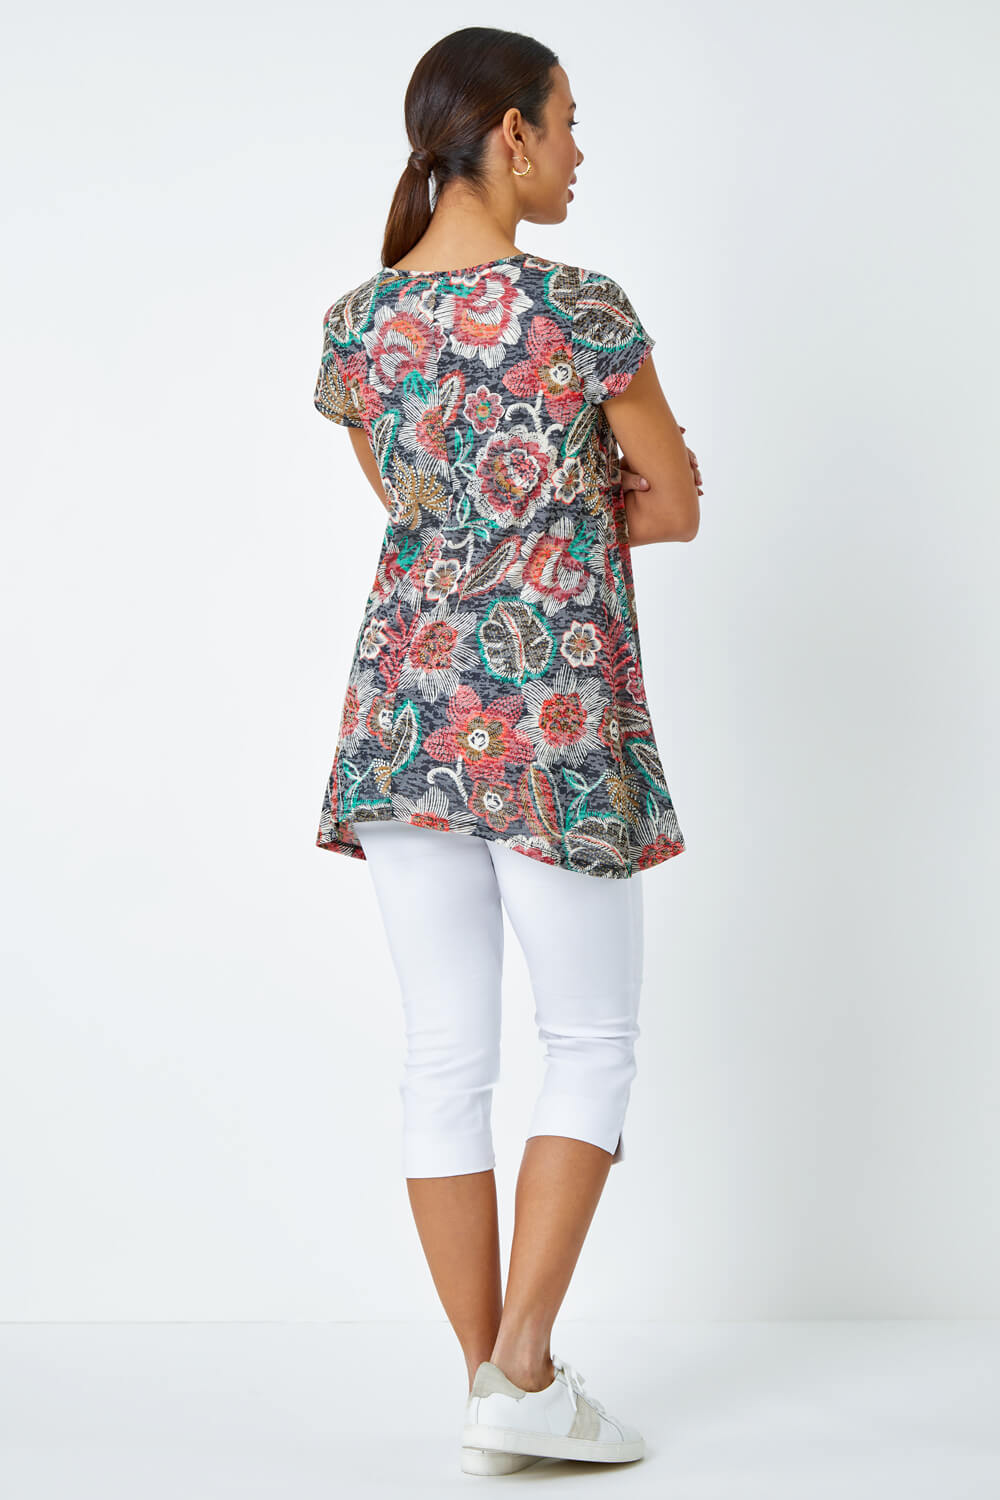 Red Floral Stretch Hanky Hem Tunic Top, Image 3 of 5